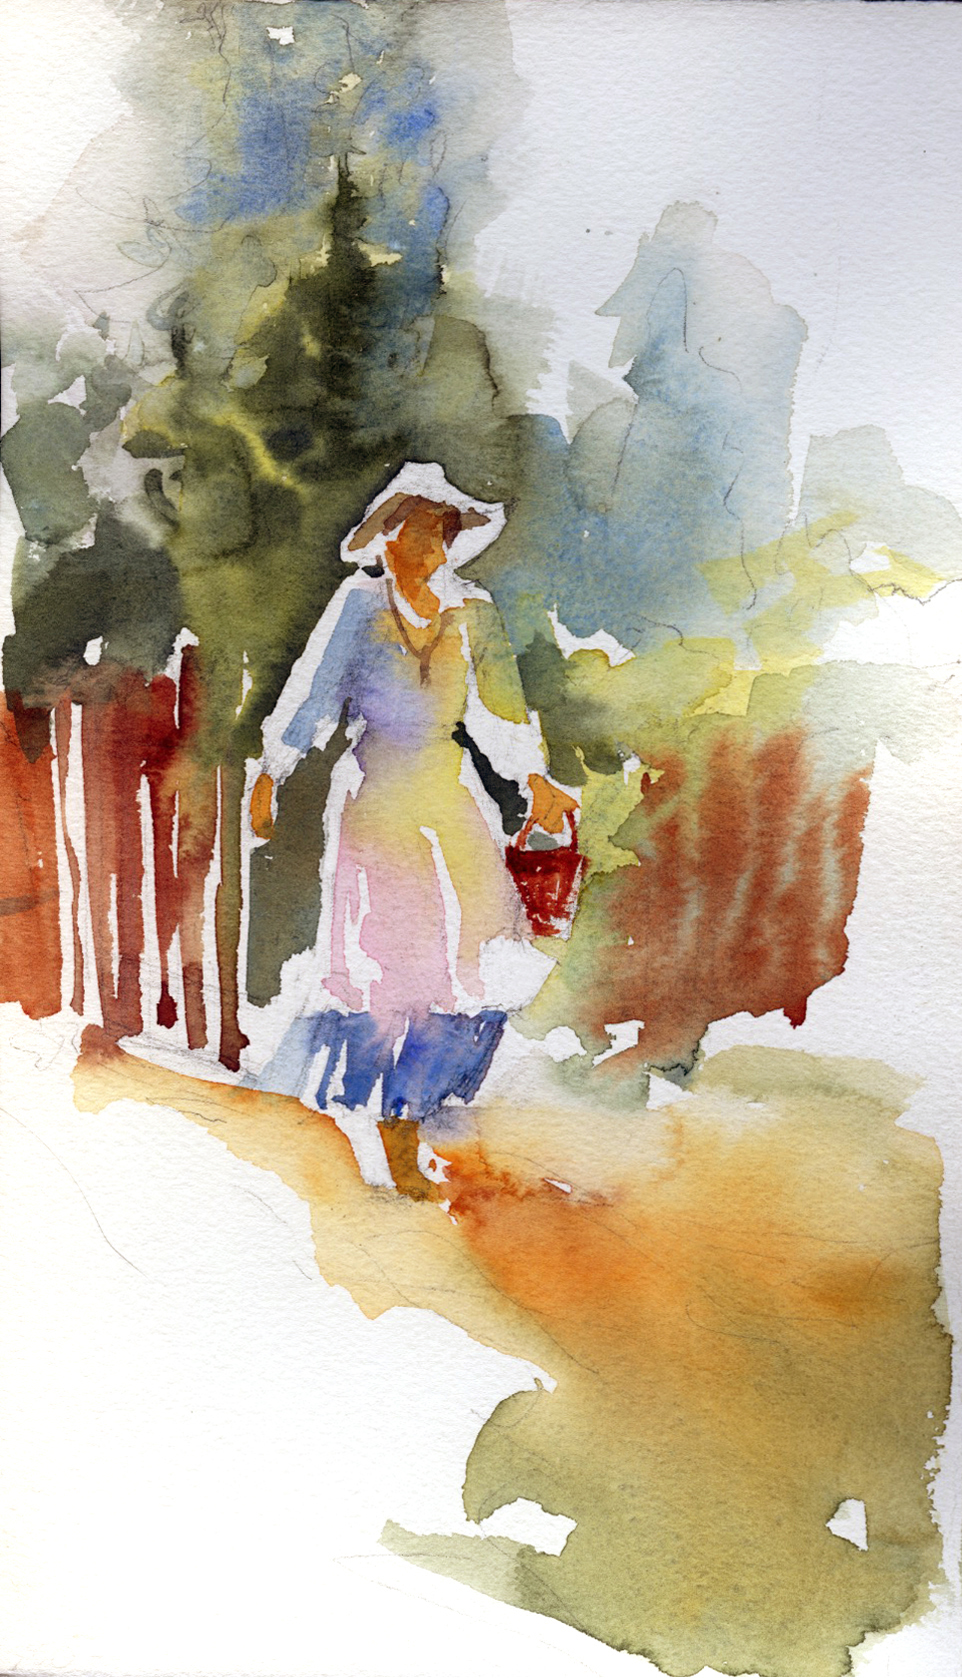 "Girl with Basket" (10 x 6 in., watercolor) by Susan Blackwood